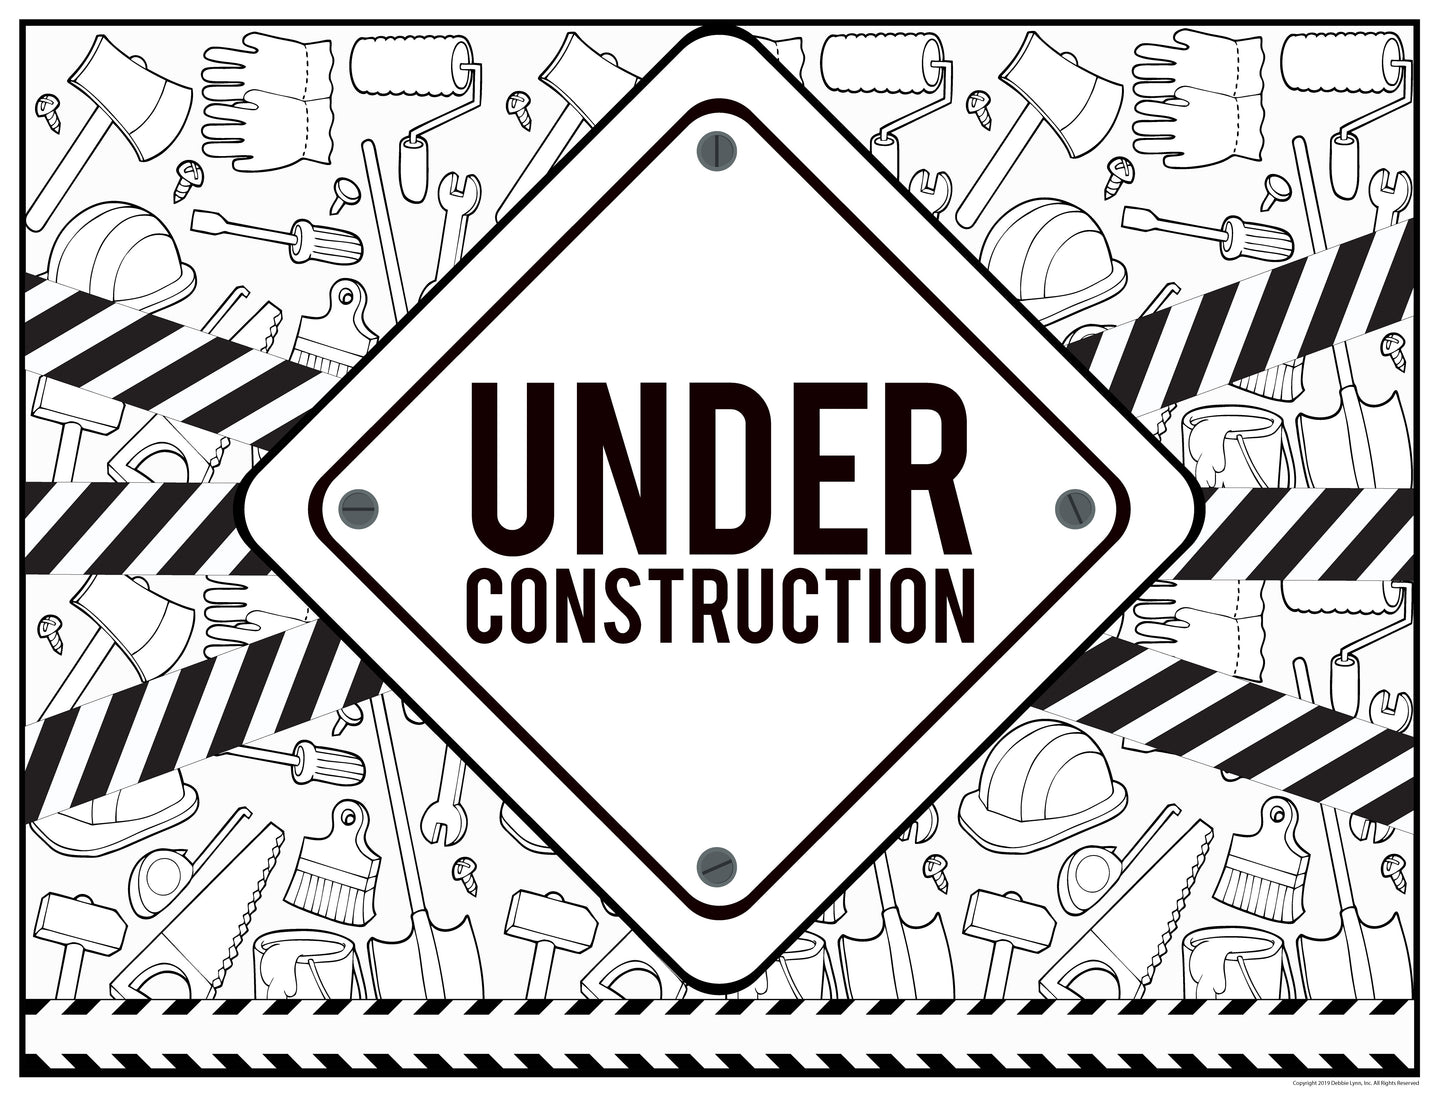 Under Construction Personalized Giant Coloring Poster 46"x60"